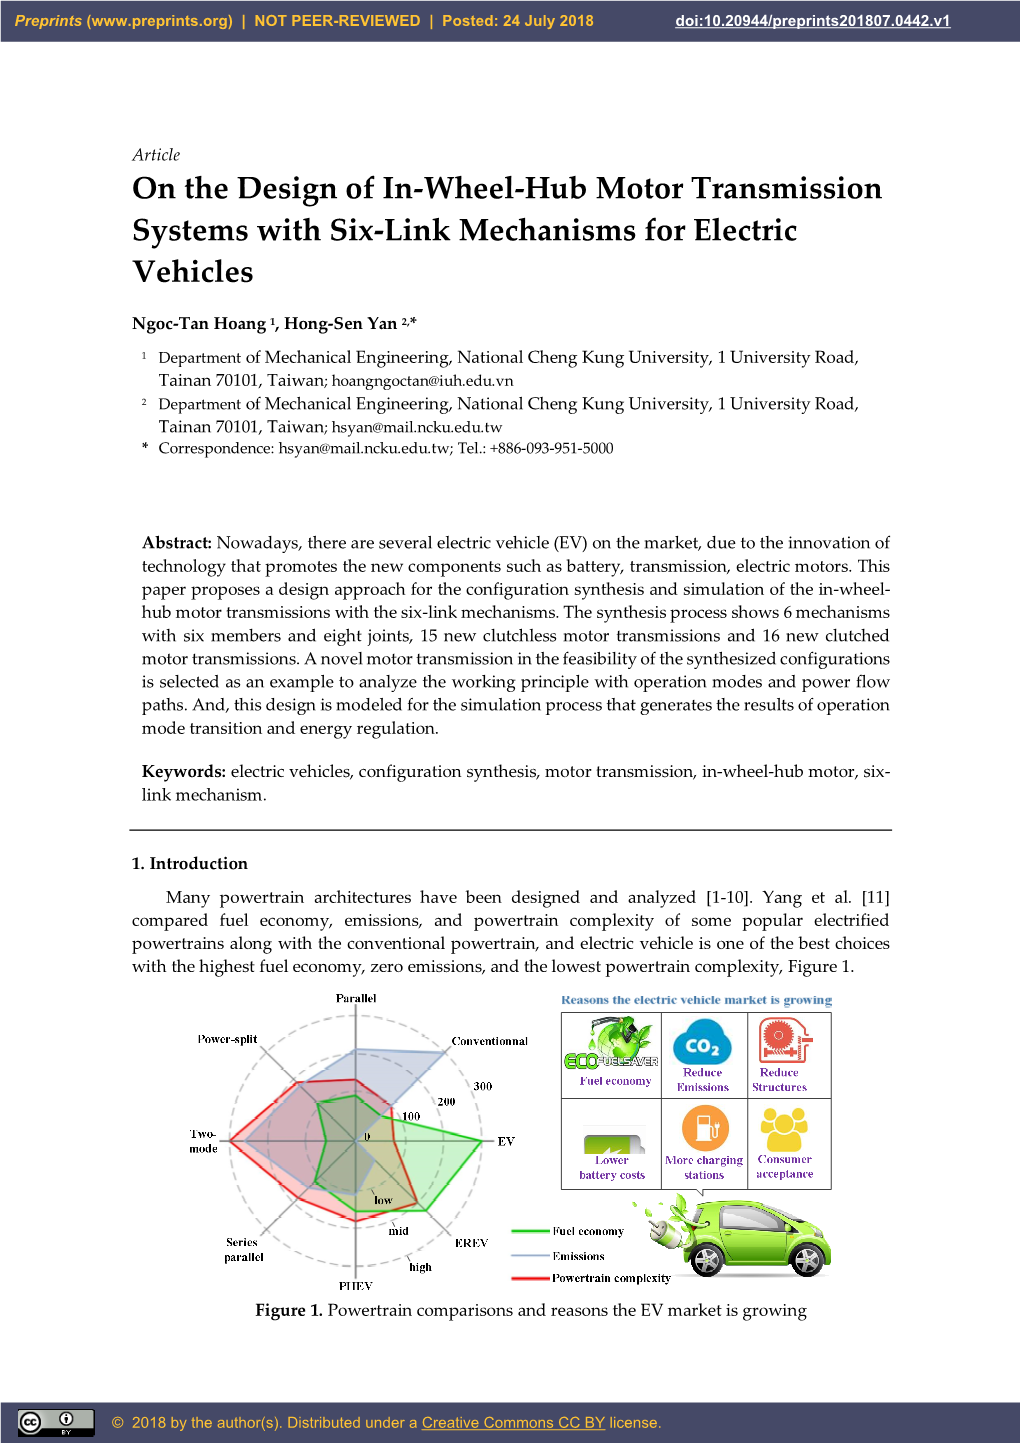 On the Design of In-Wheel-Hub Motor Transmission Systems with Six-Link Mechanisms for Electric Vehicles